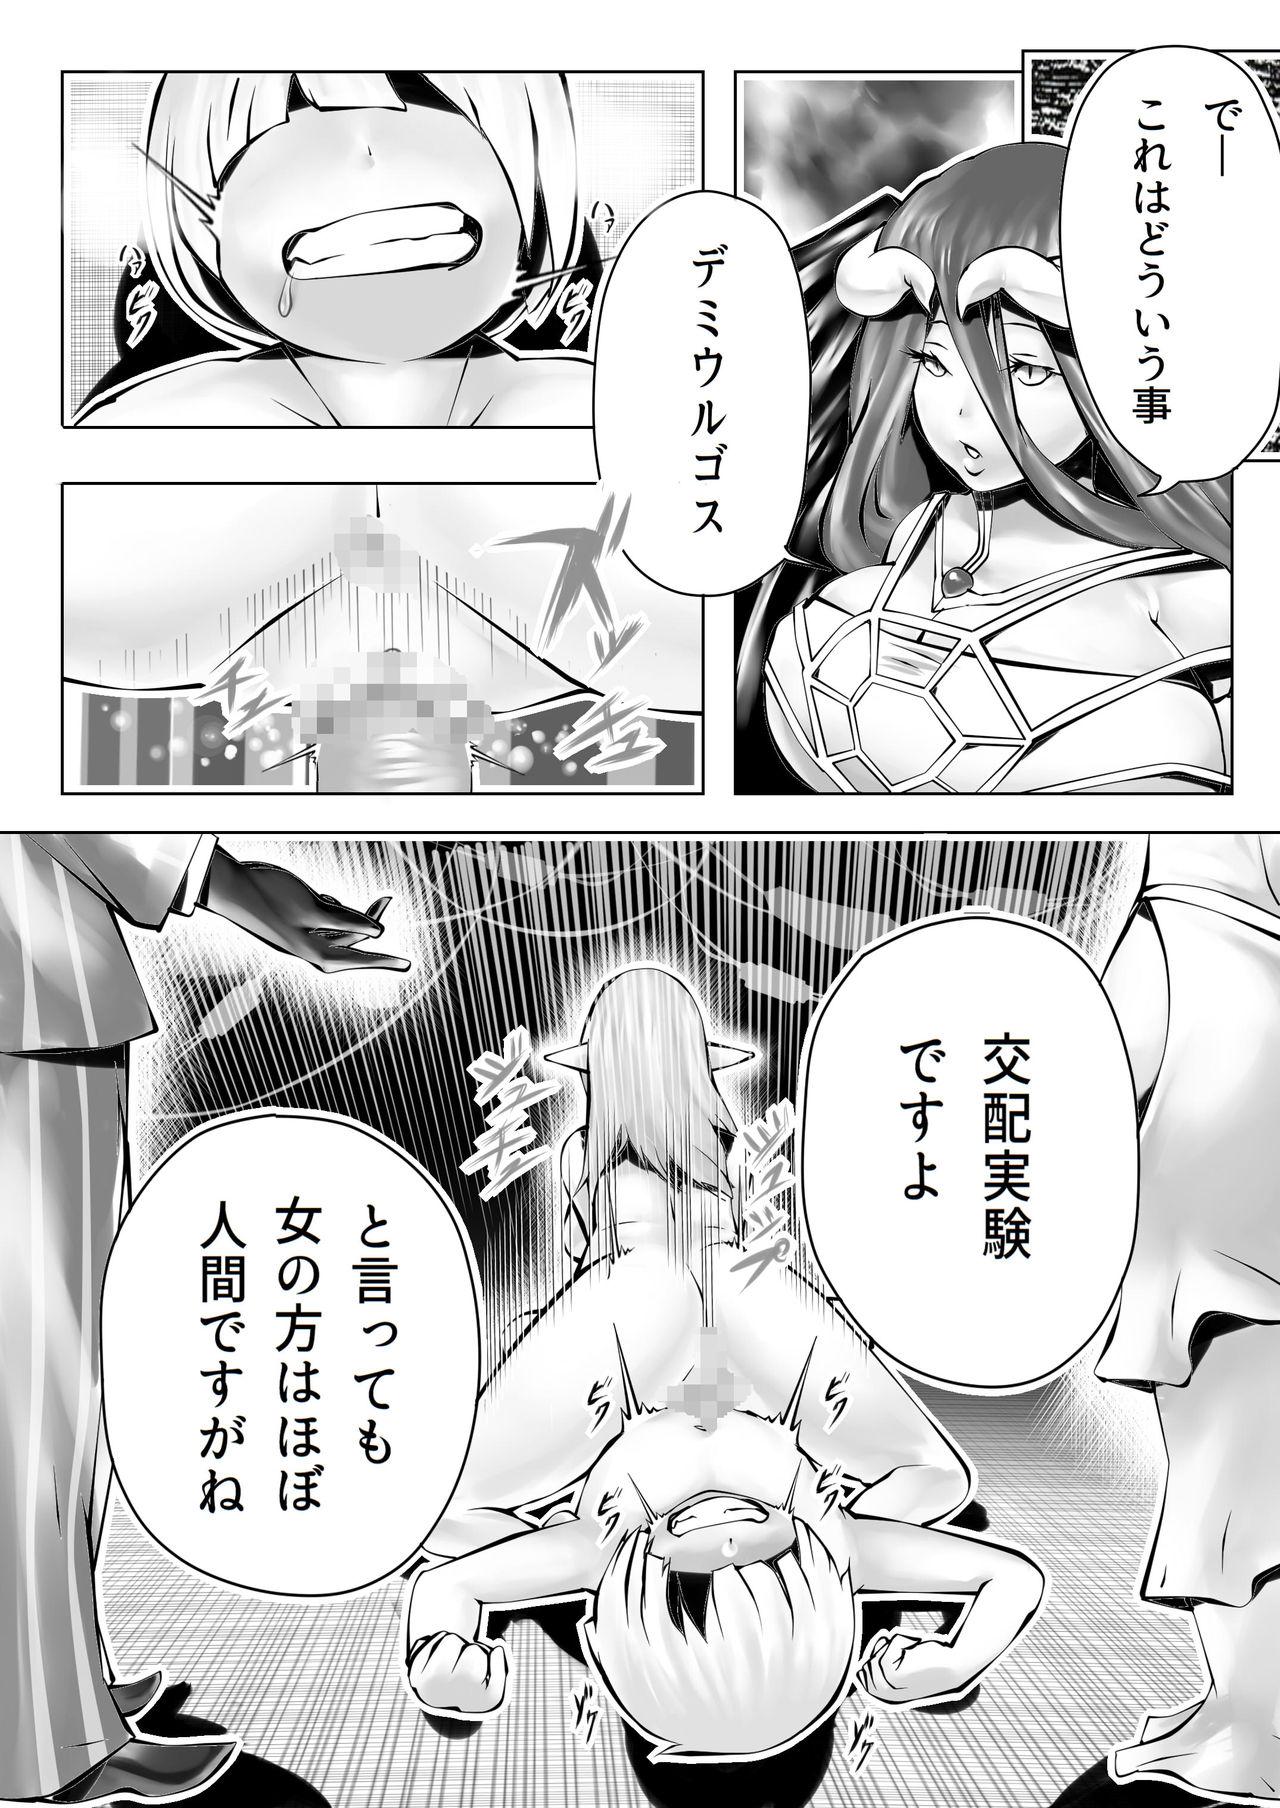 Stretching Nfirea x Albedo - Overlord Forbidden - Page 3